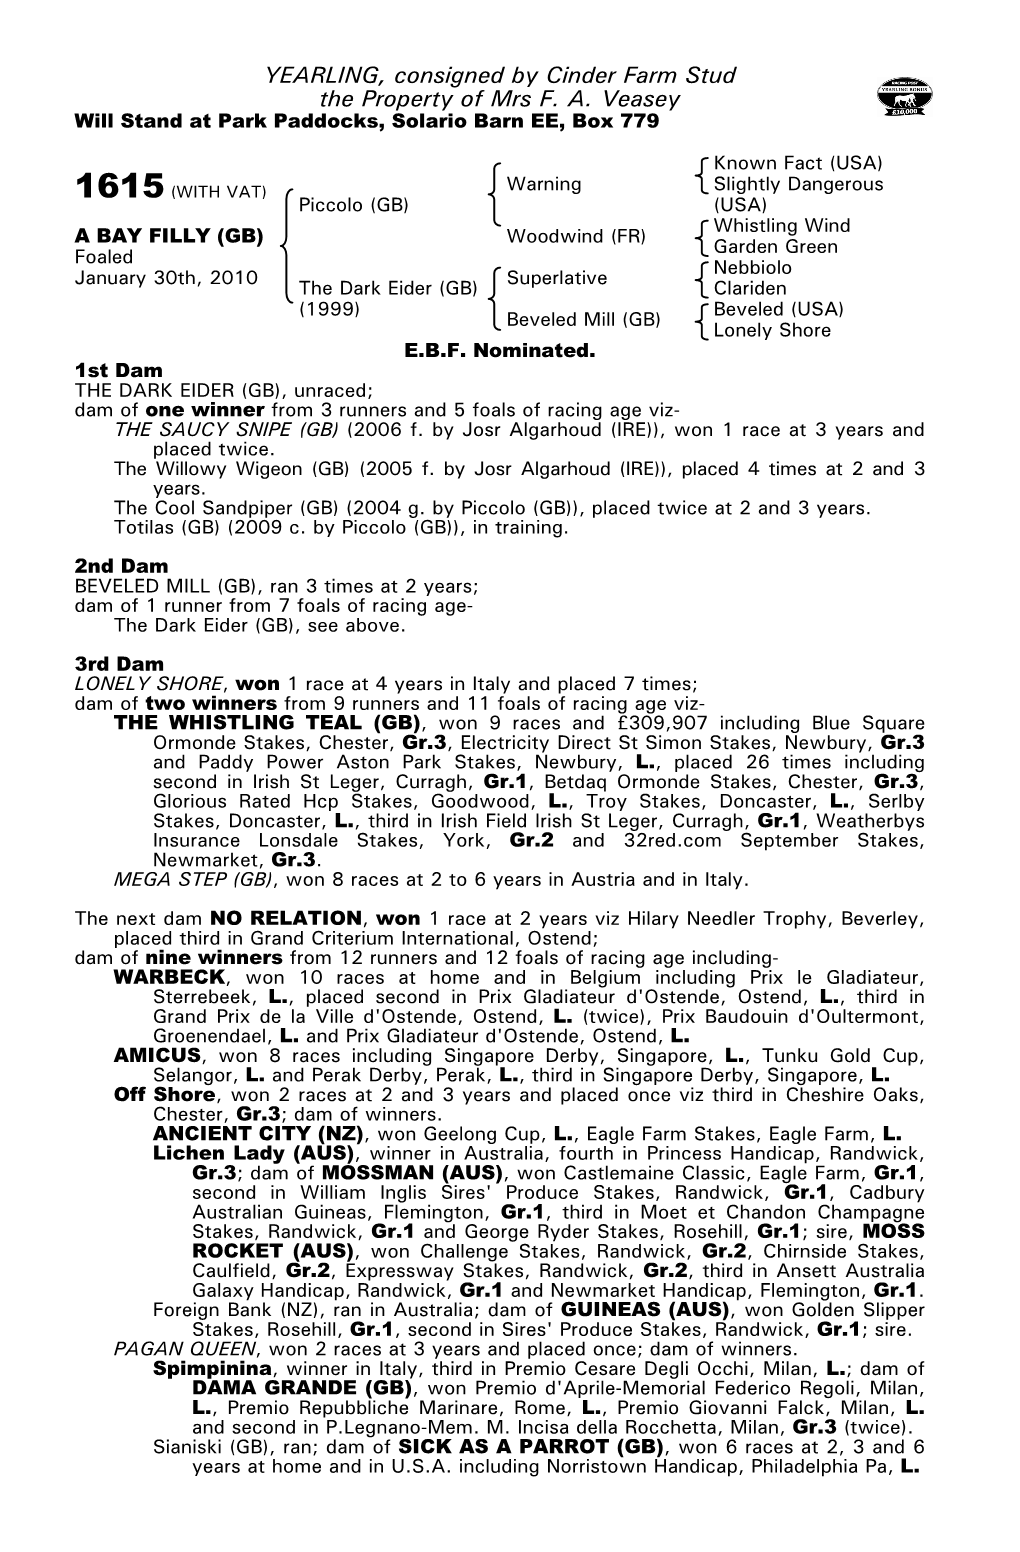 YEARLING, Consigned by Cinder Farm Stud the Property of Mrs F. A. Veasey Will Stand at Park Paddocks, Solario Barn EE, Box 779